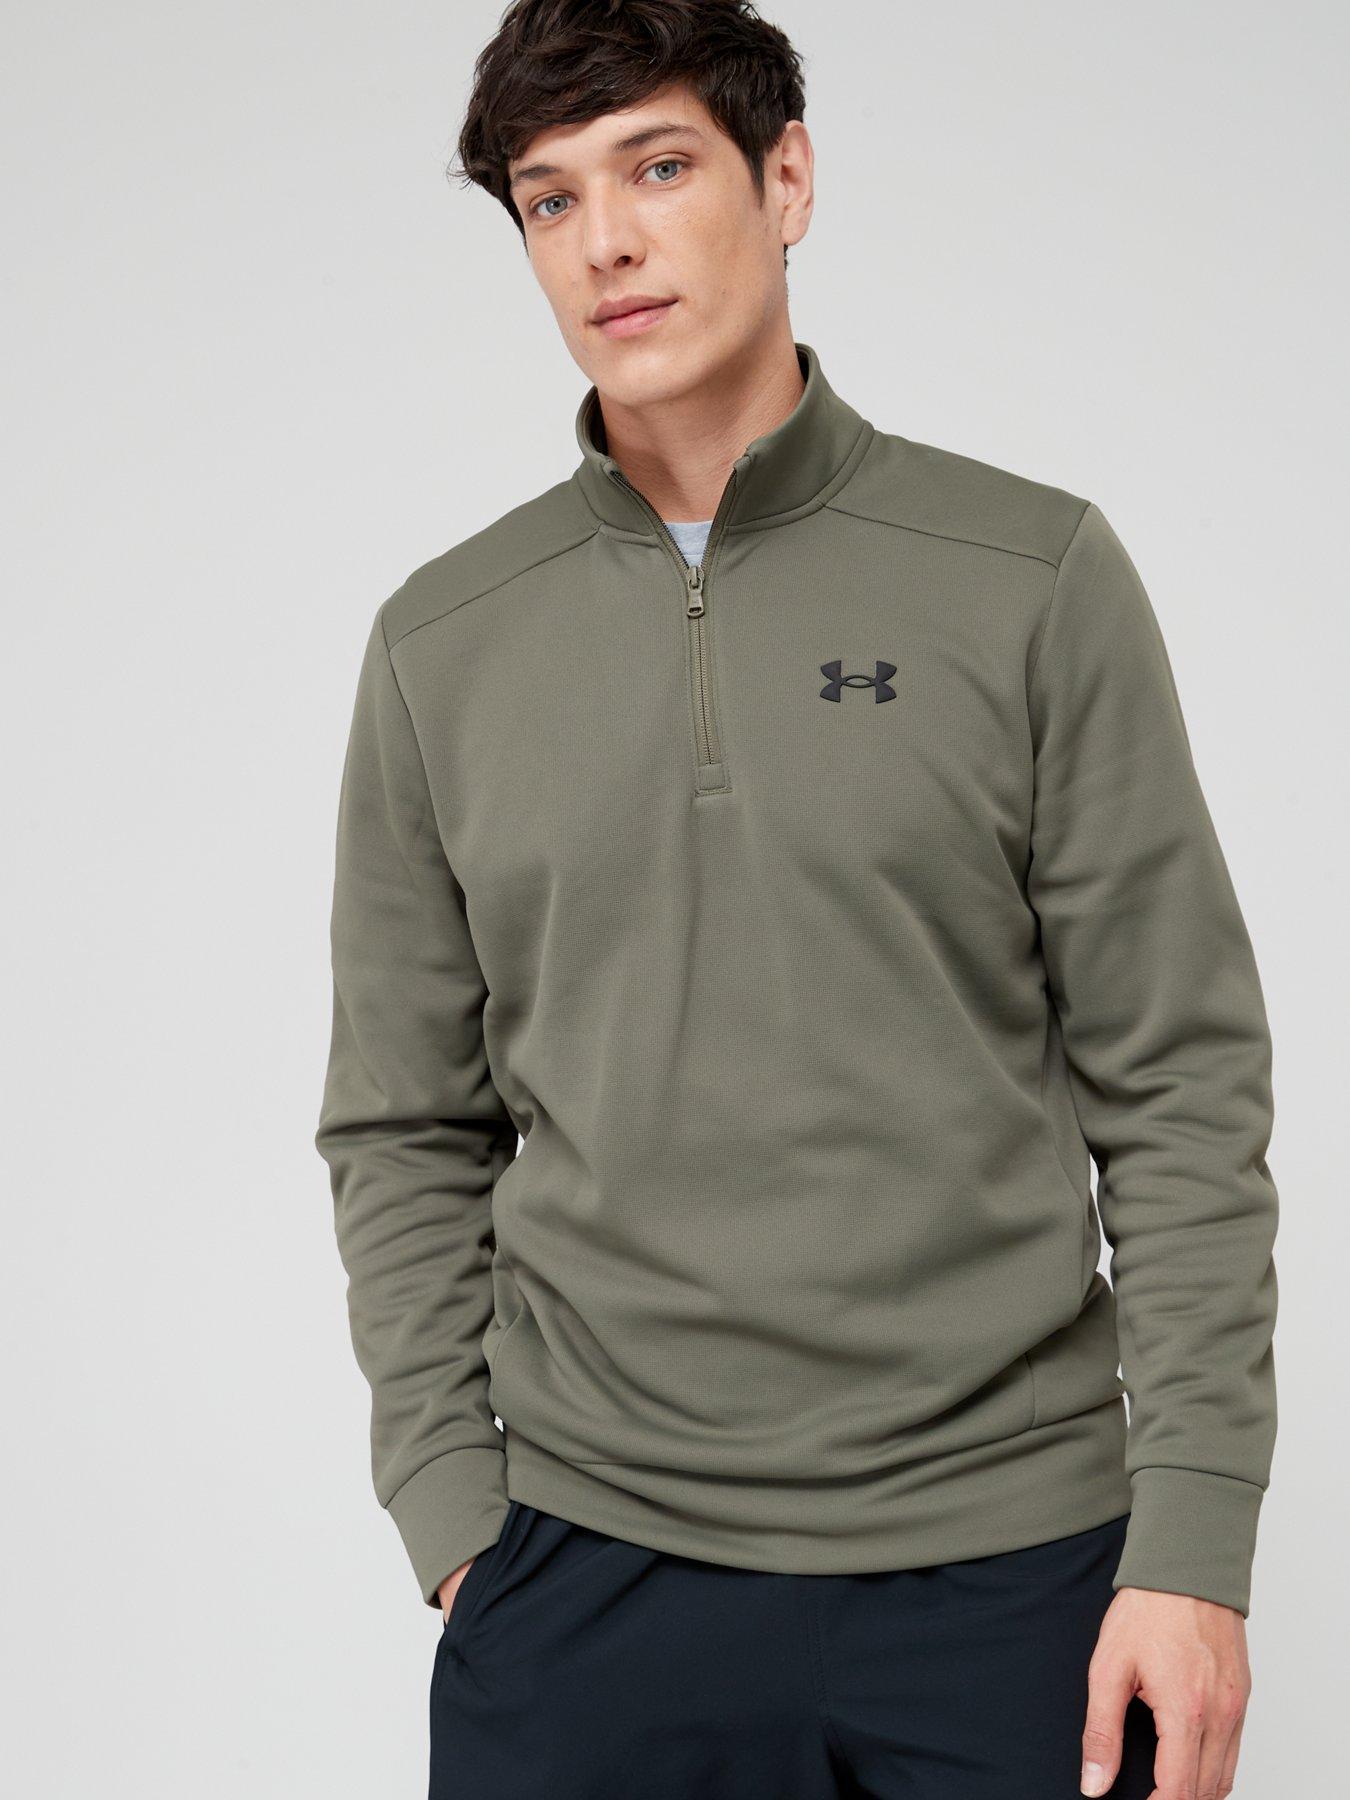 llenar montar consultor Men's UNDER ARMOUR T-Shirts, Tops & Polo Shirts | Very.co.uk